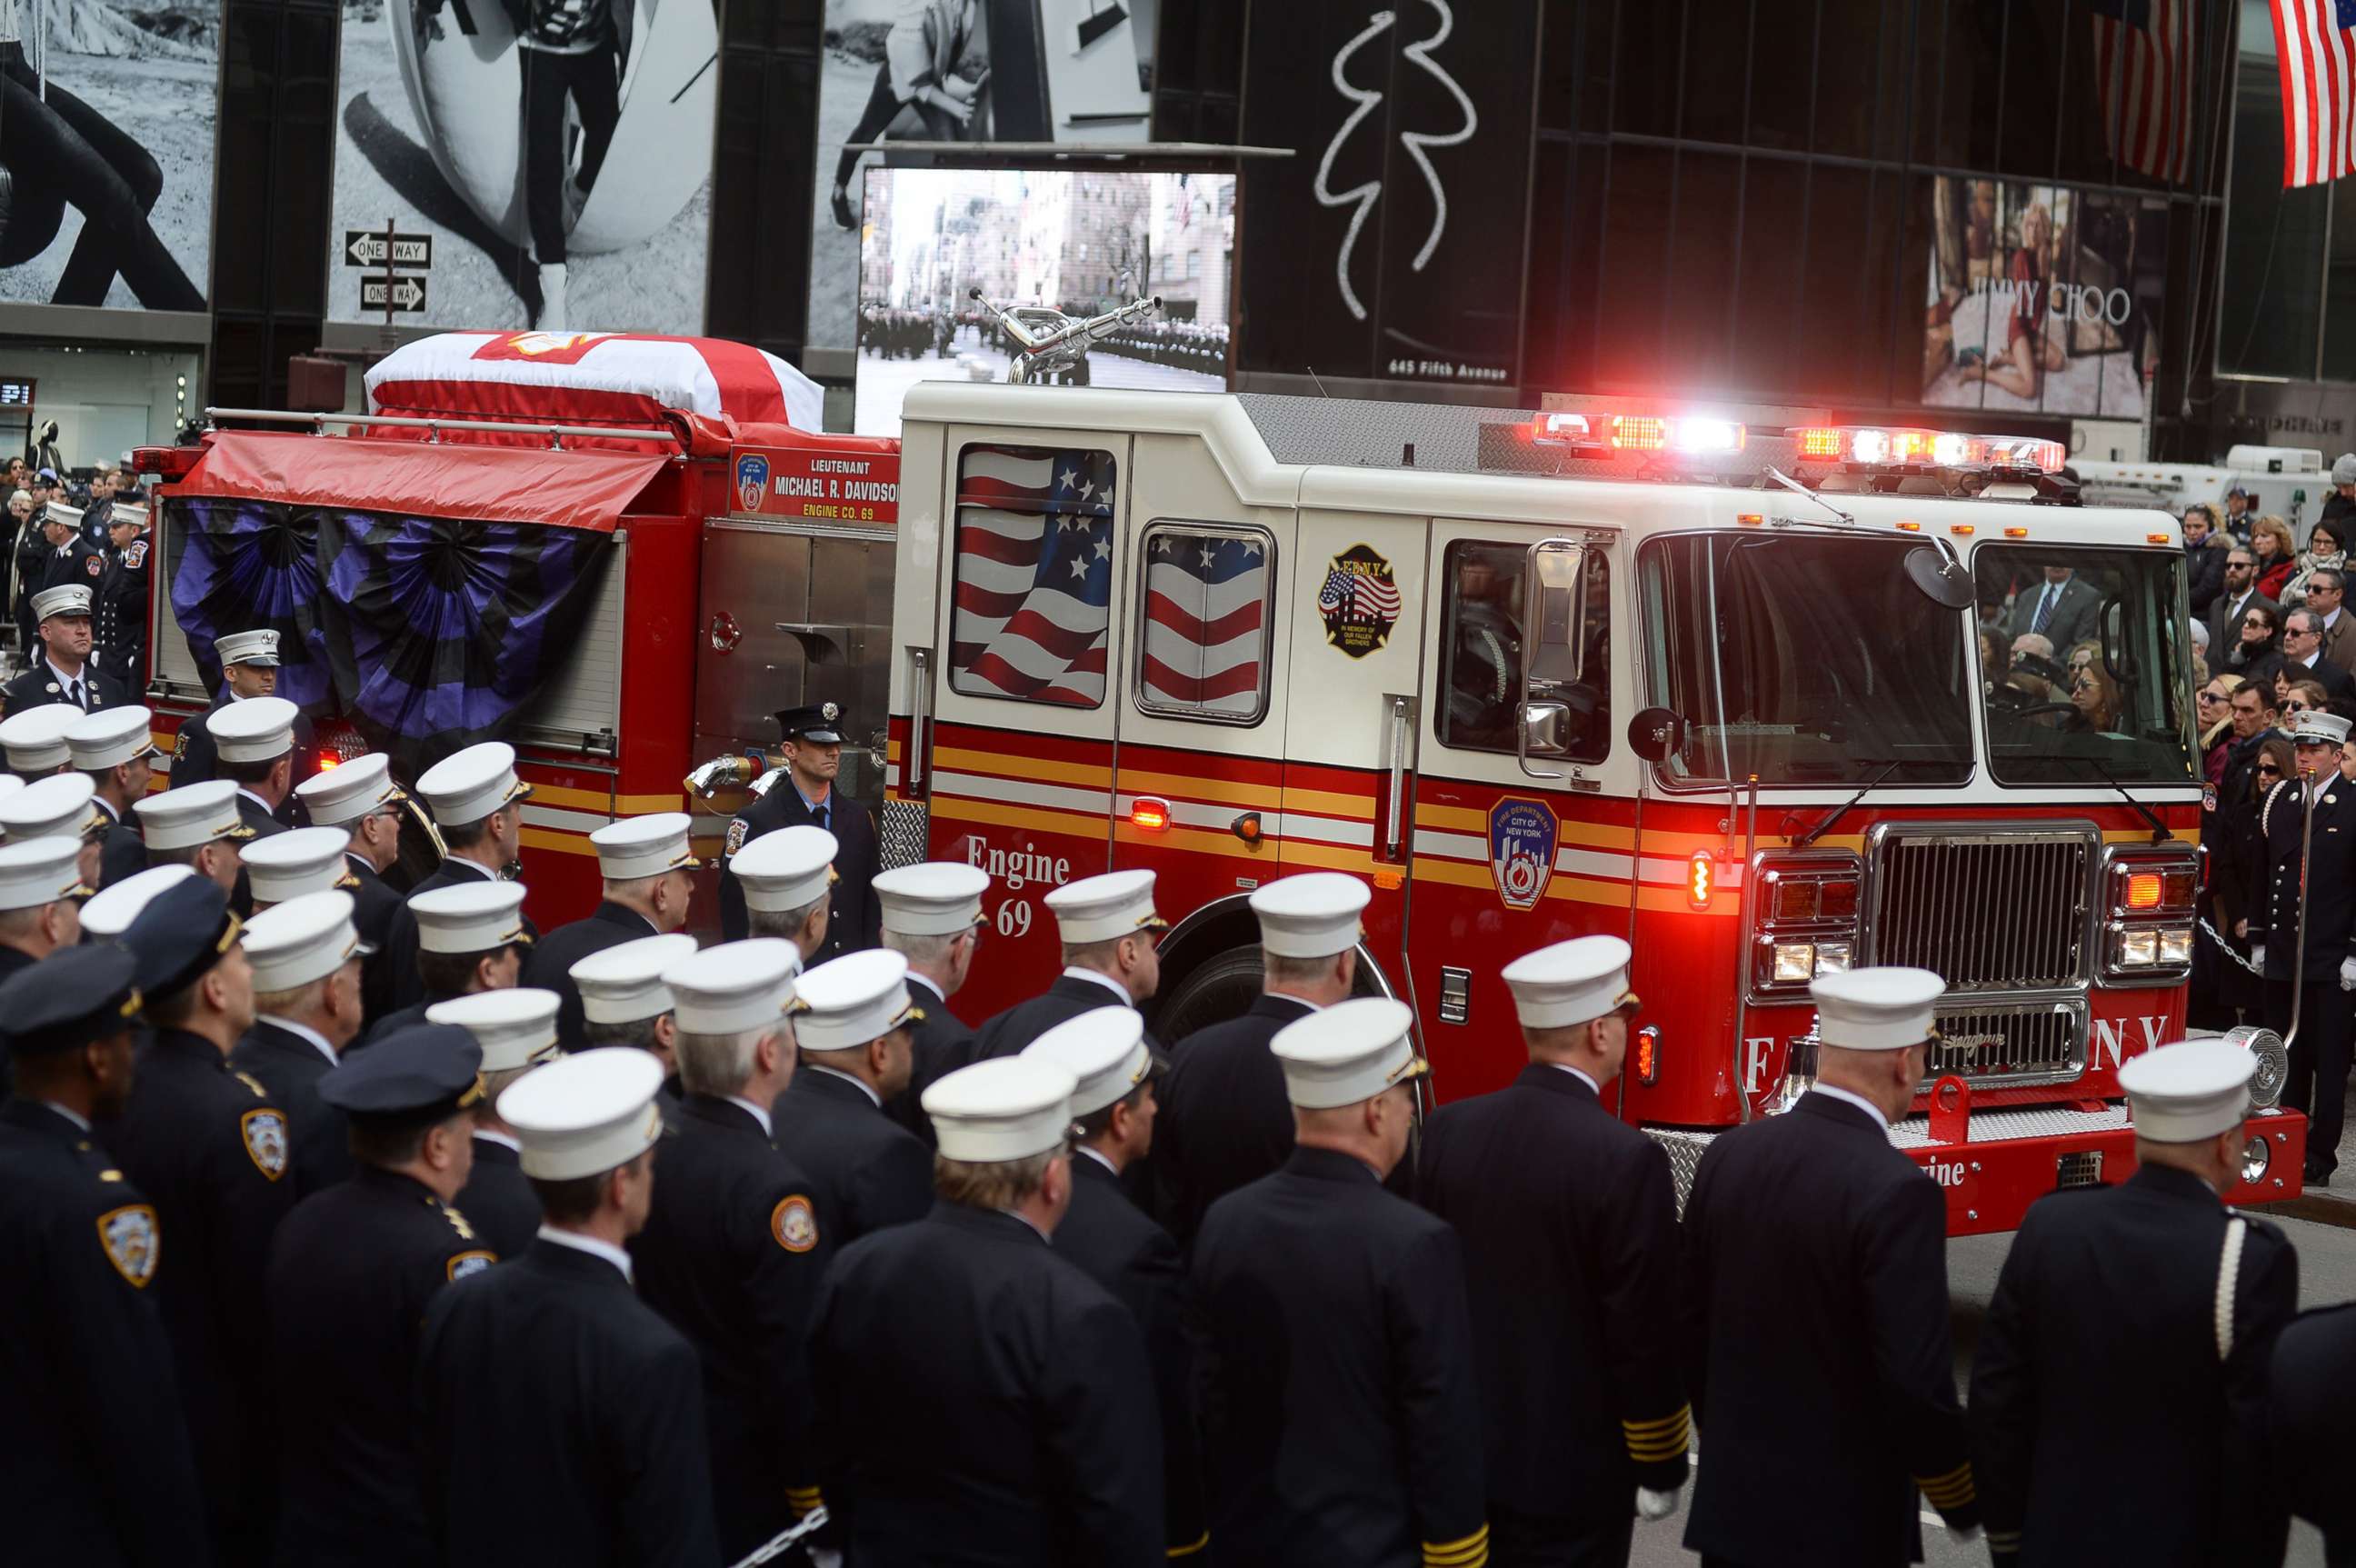 PHOTO: A funeral for firefighter Michael Davidson at St. Patrick's Cathedral, New York, March 27, 2018.